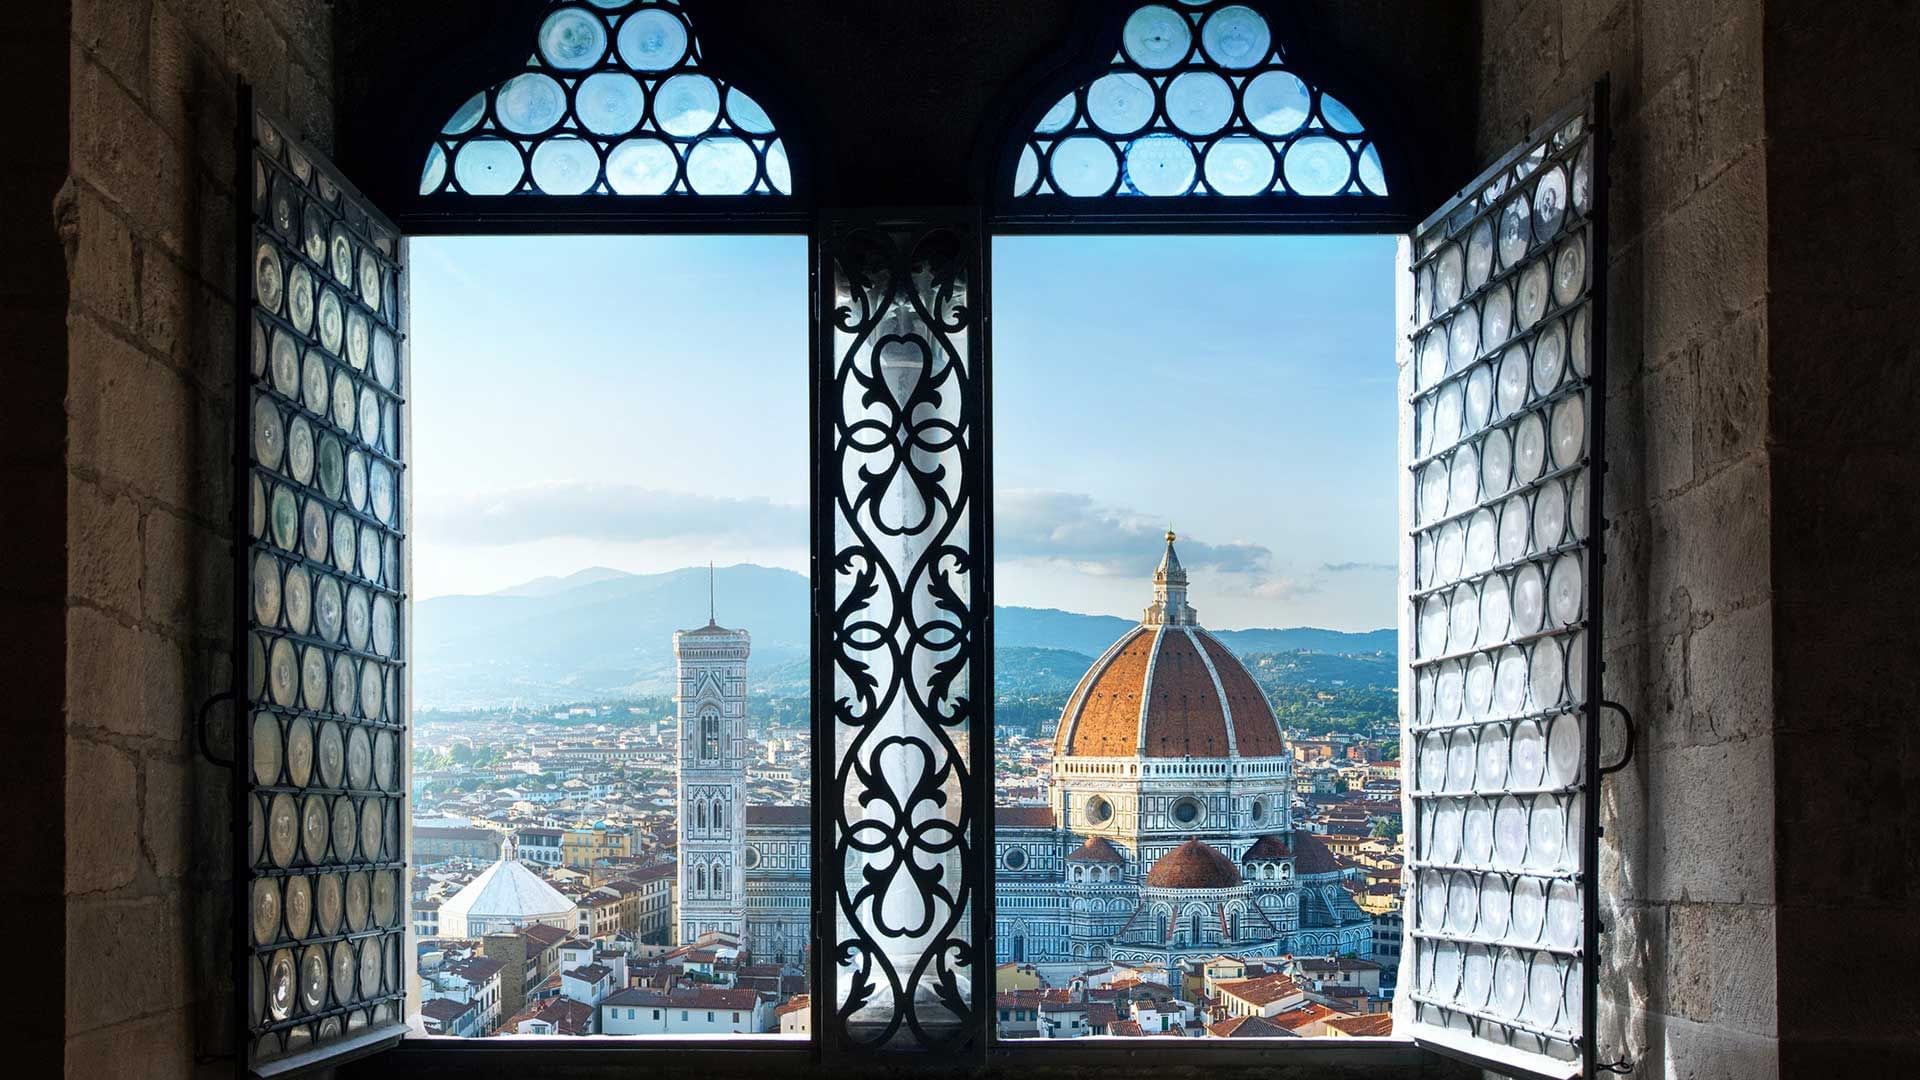 A Weekend in Florence? Where to Go